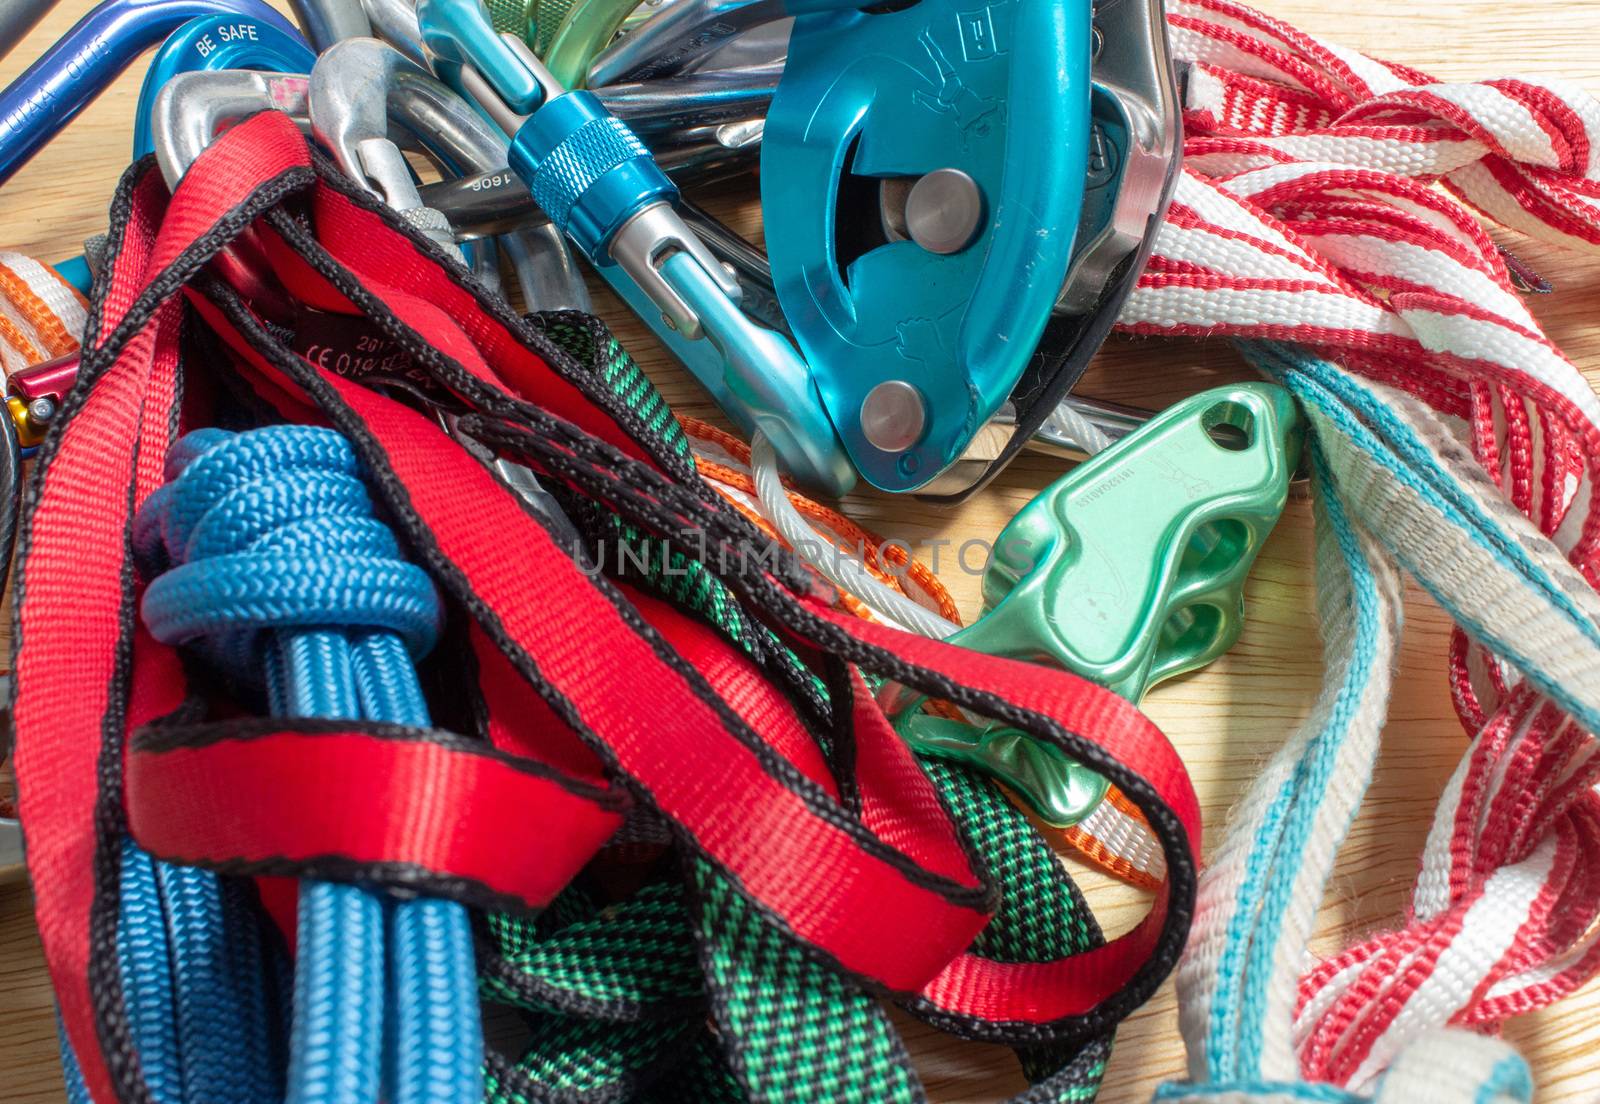 Rock climbing rack, with belay devices, carabiners, quickdraws, slings and cords